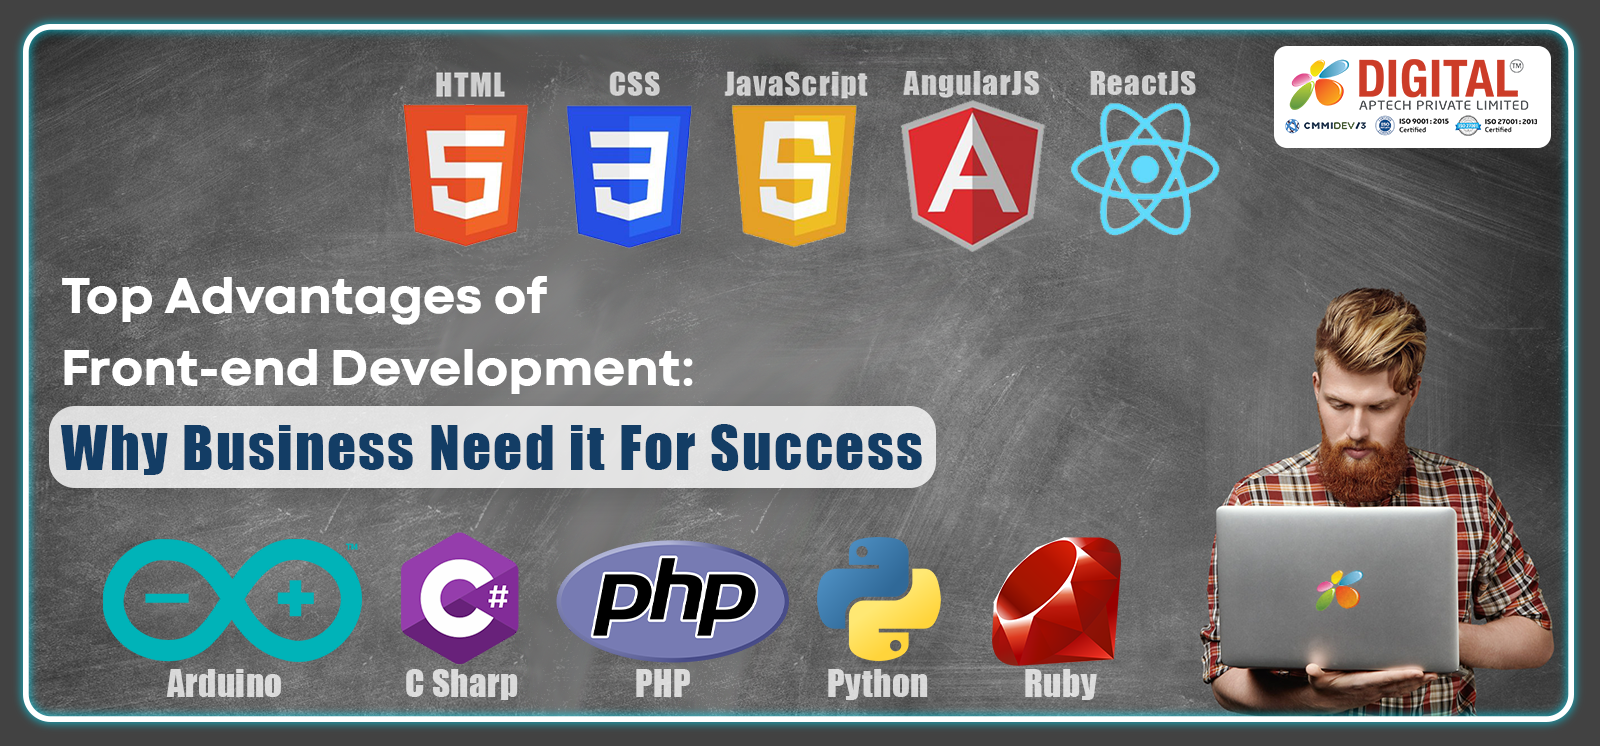 Top Advantages of Front-end Development: Why Businesses Need it For Success